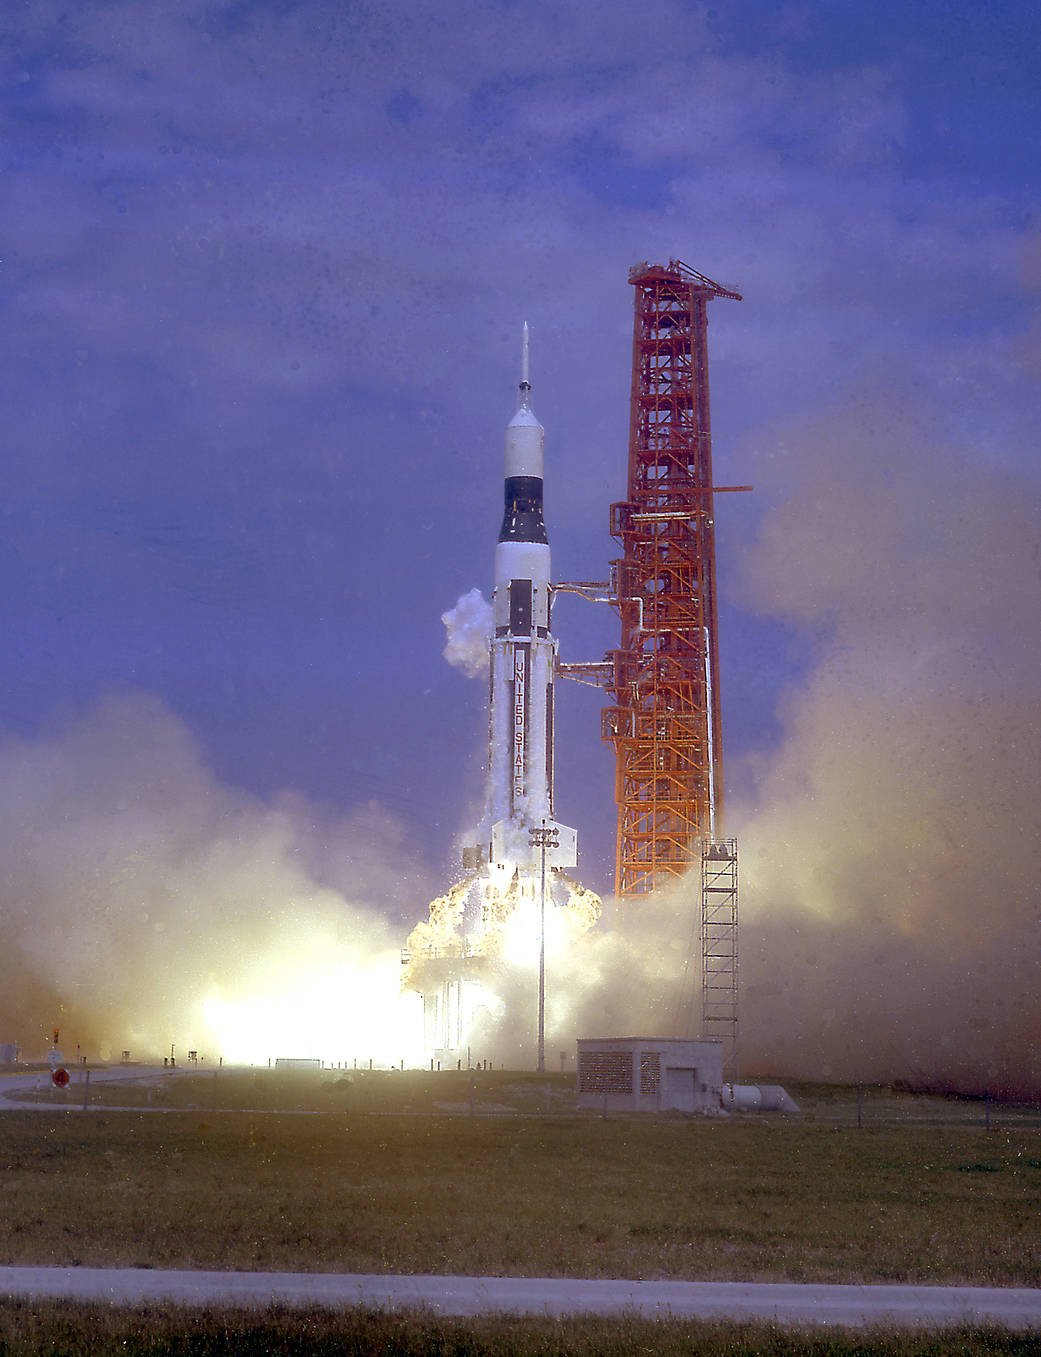 This week in 1964, SA-7 launched from NASA’s Kennedy Space Center.